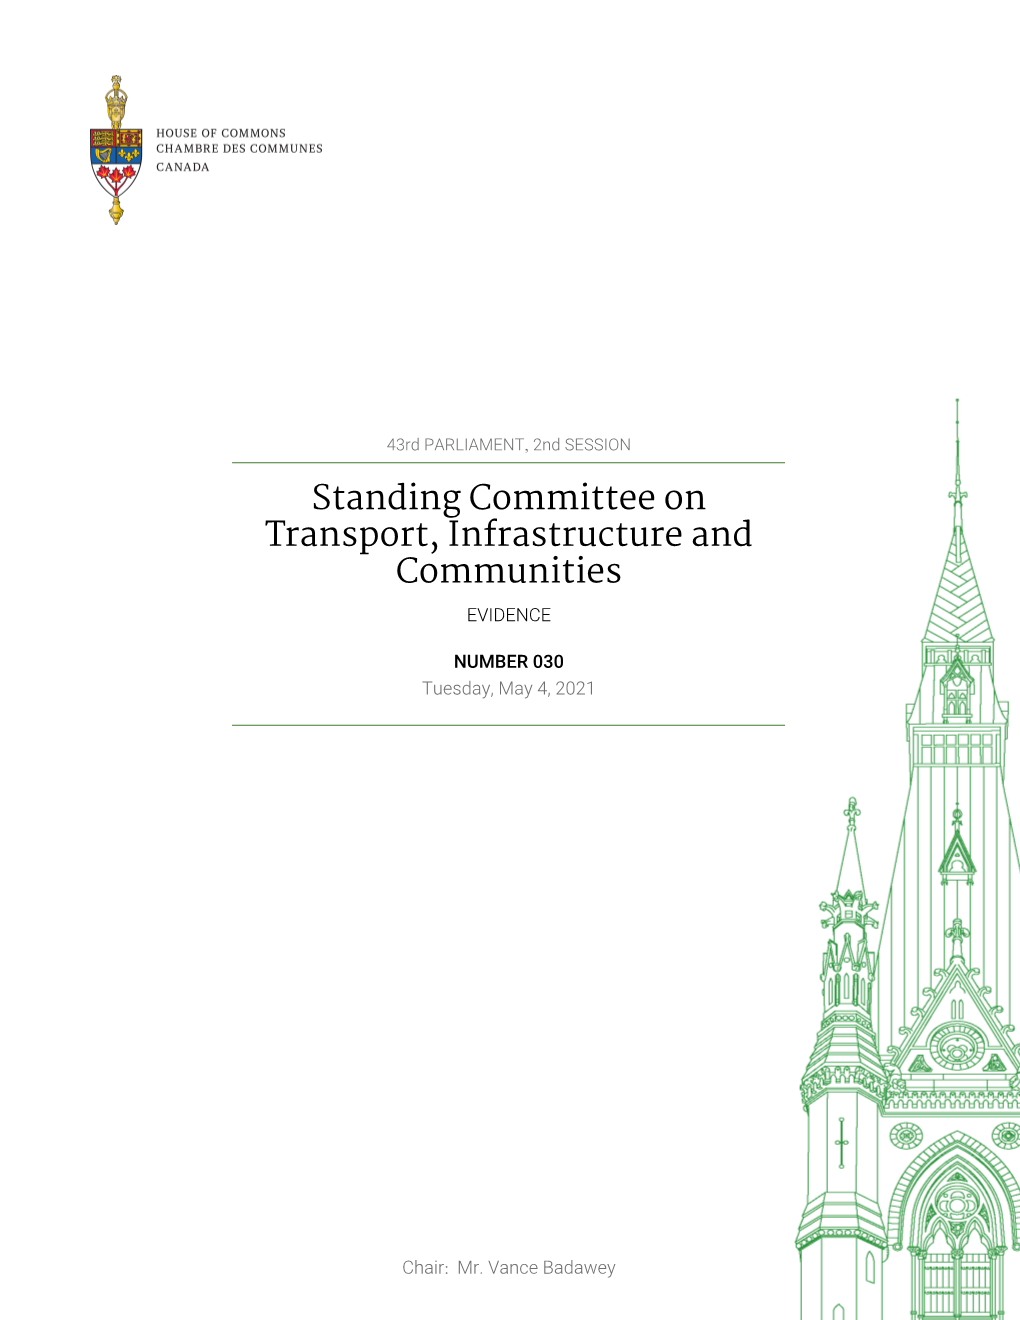 Evidence of the Standing Committee on Transport